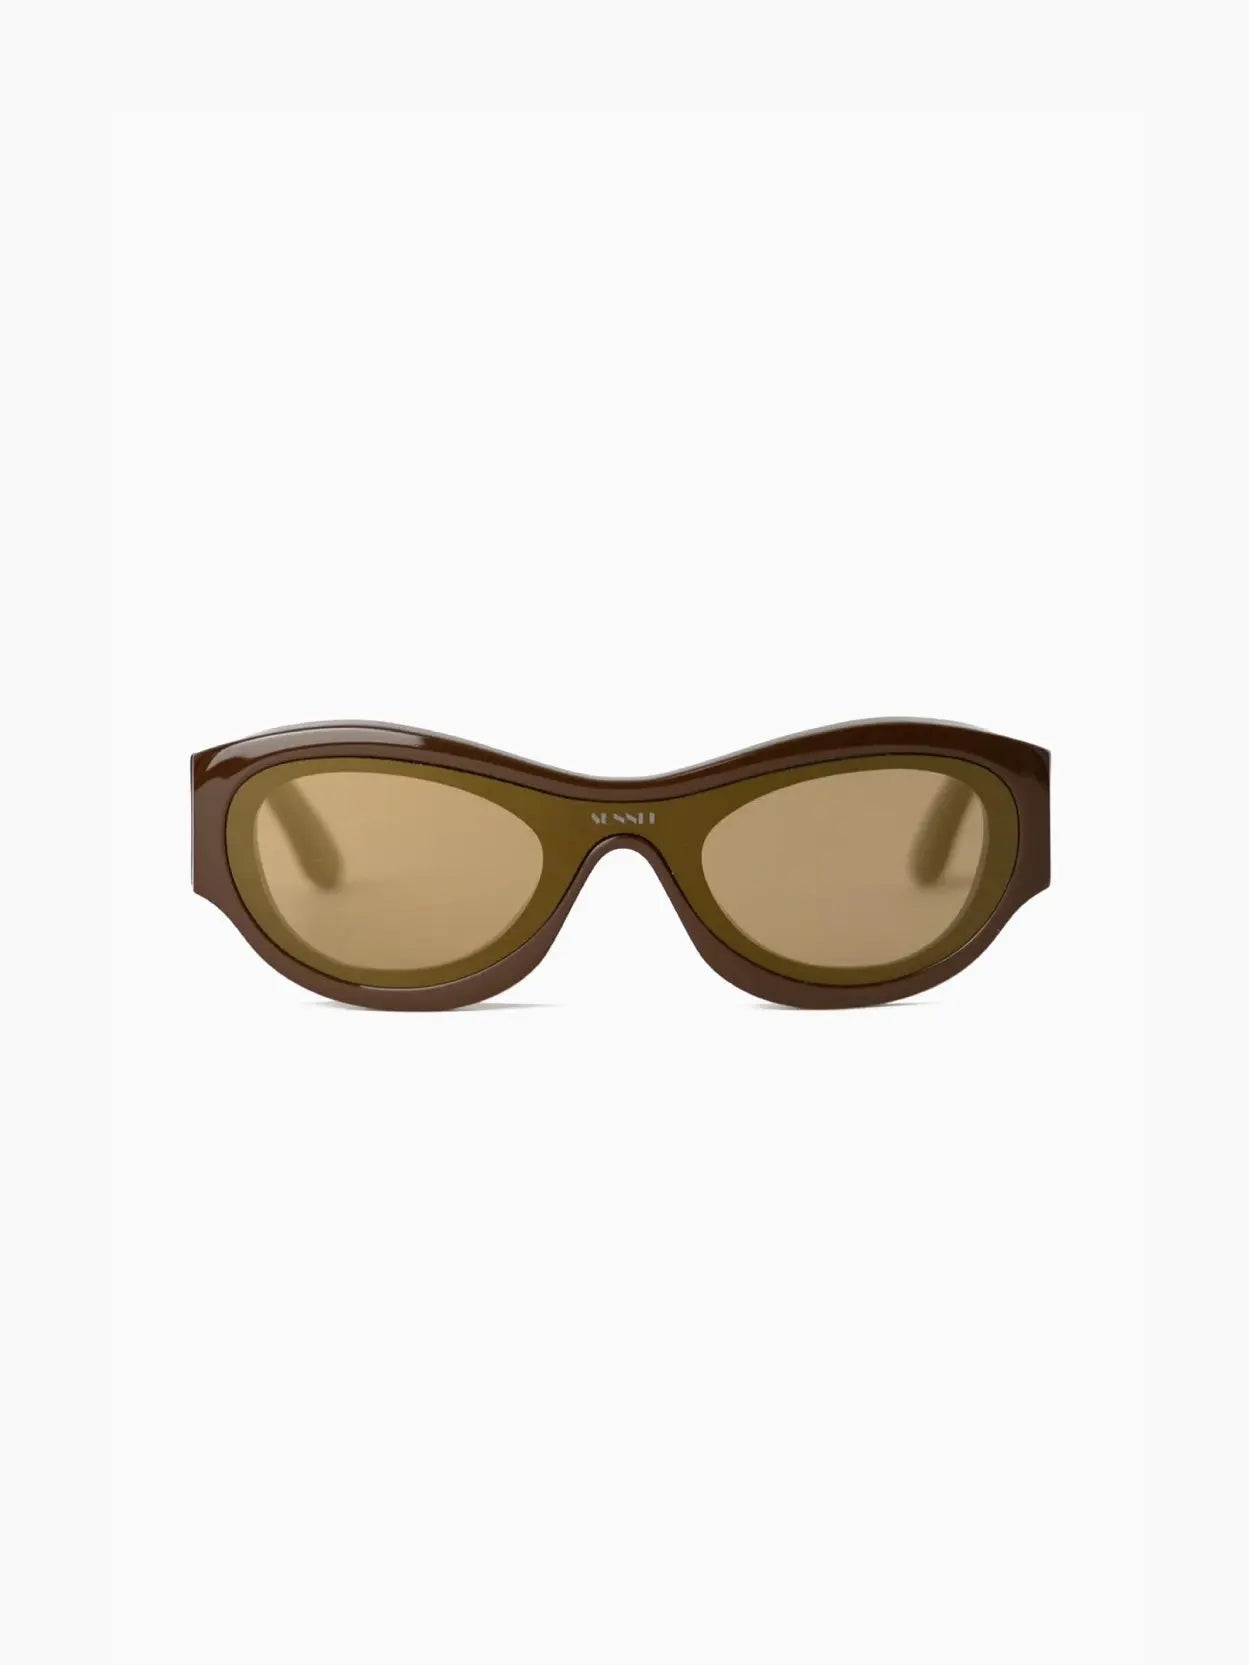 A pair of Prototipo 5 Sunglasses Dark Brown by Sunnei. The frame is sleek and slightly curved, with the brand name subtly displayed on the upper part of the left lens. Available at Bassalstore Barcelona, the plain white background emphasizes the stylish eyewear.